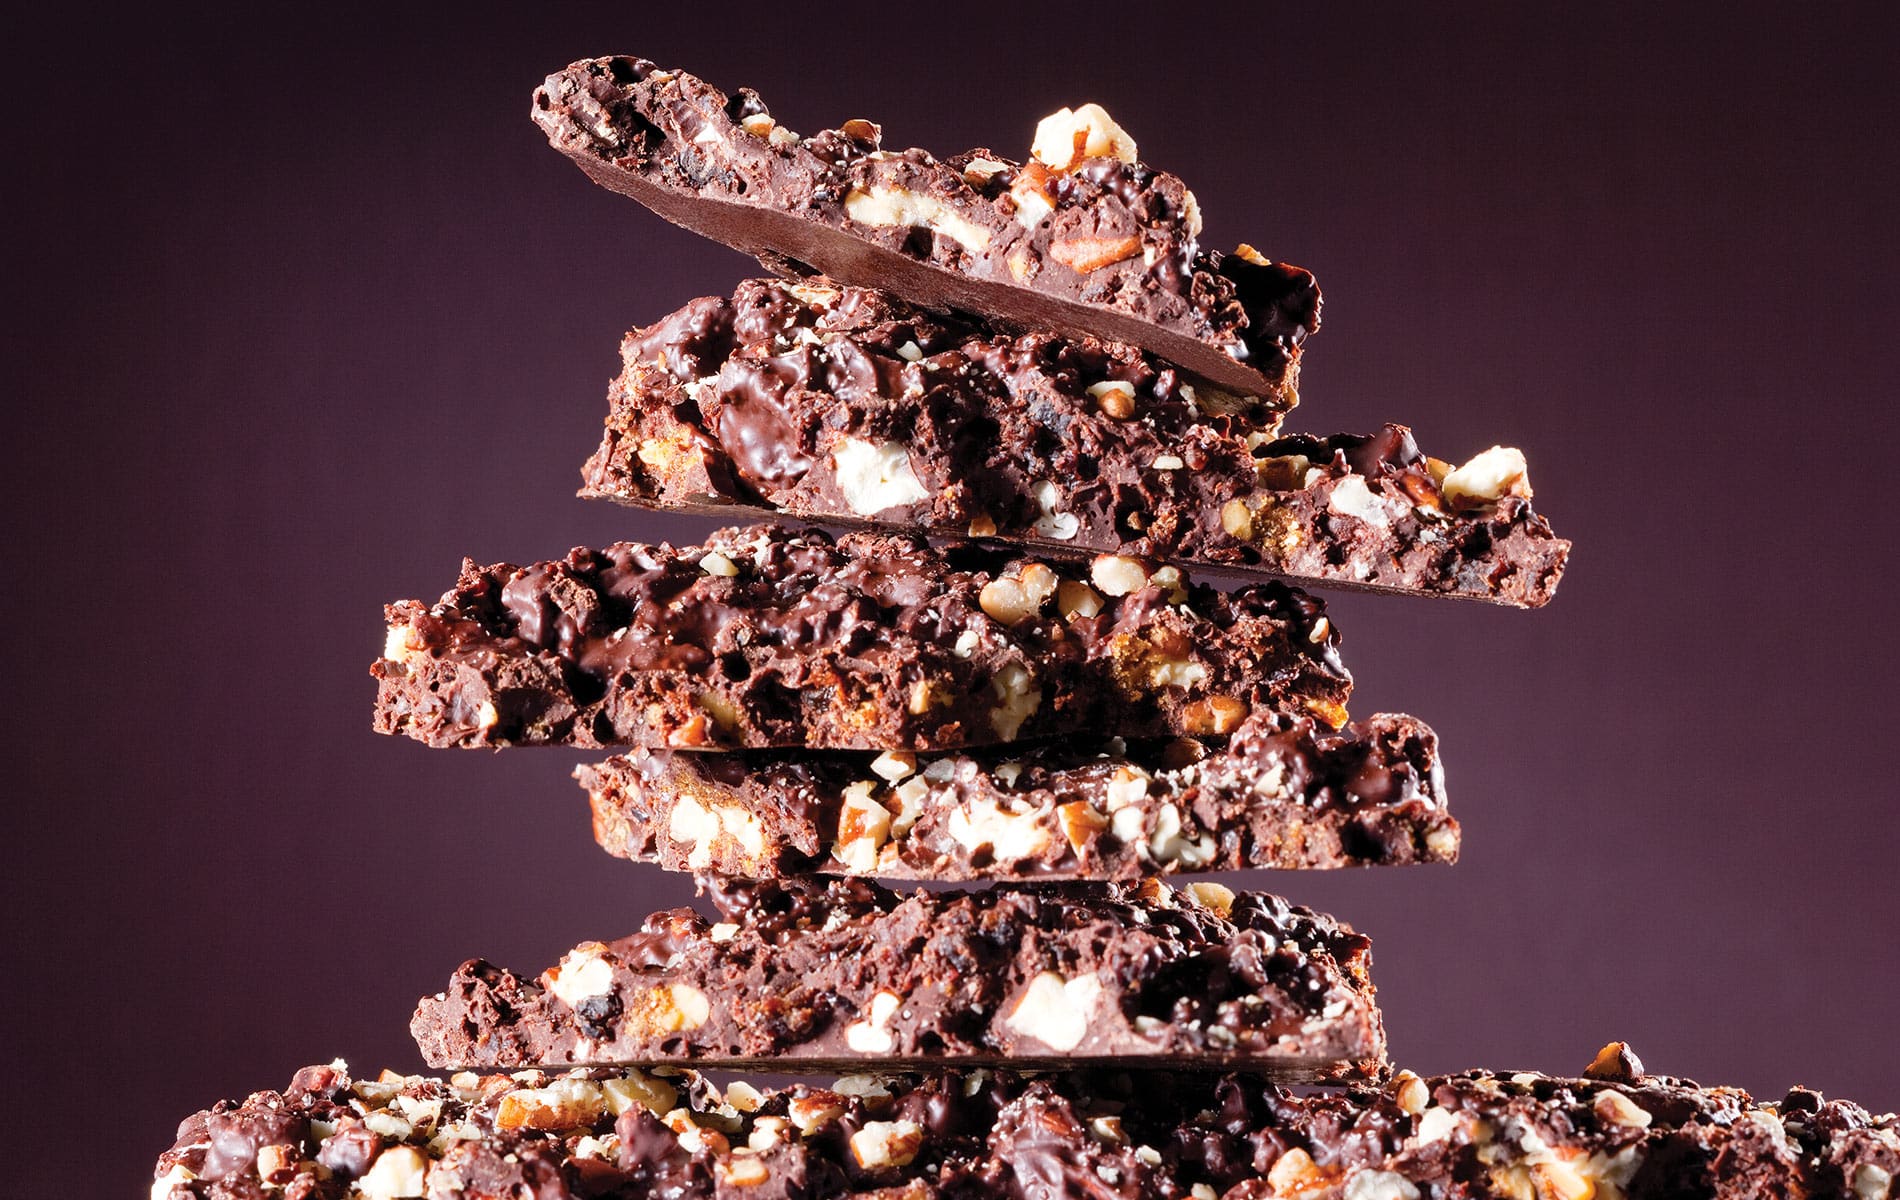 Six pieces of Dr. Sue's delicious hazelnut bark stacked on top of each other in front of a deep purple background